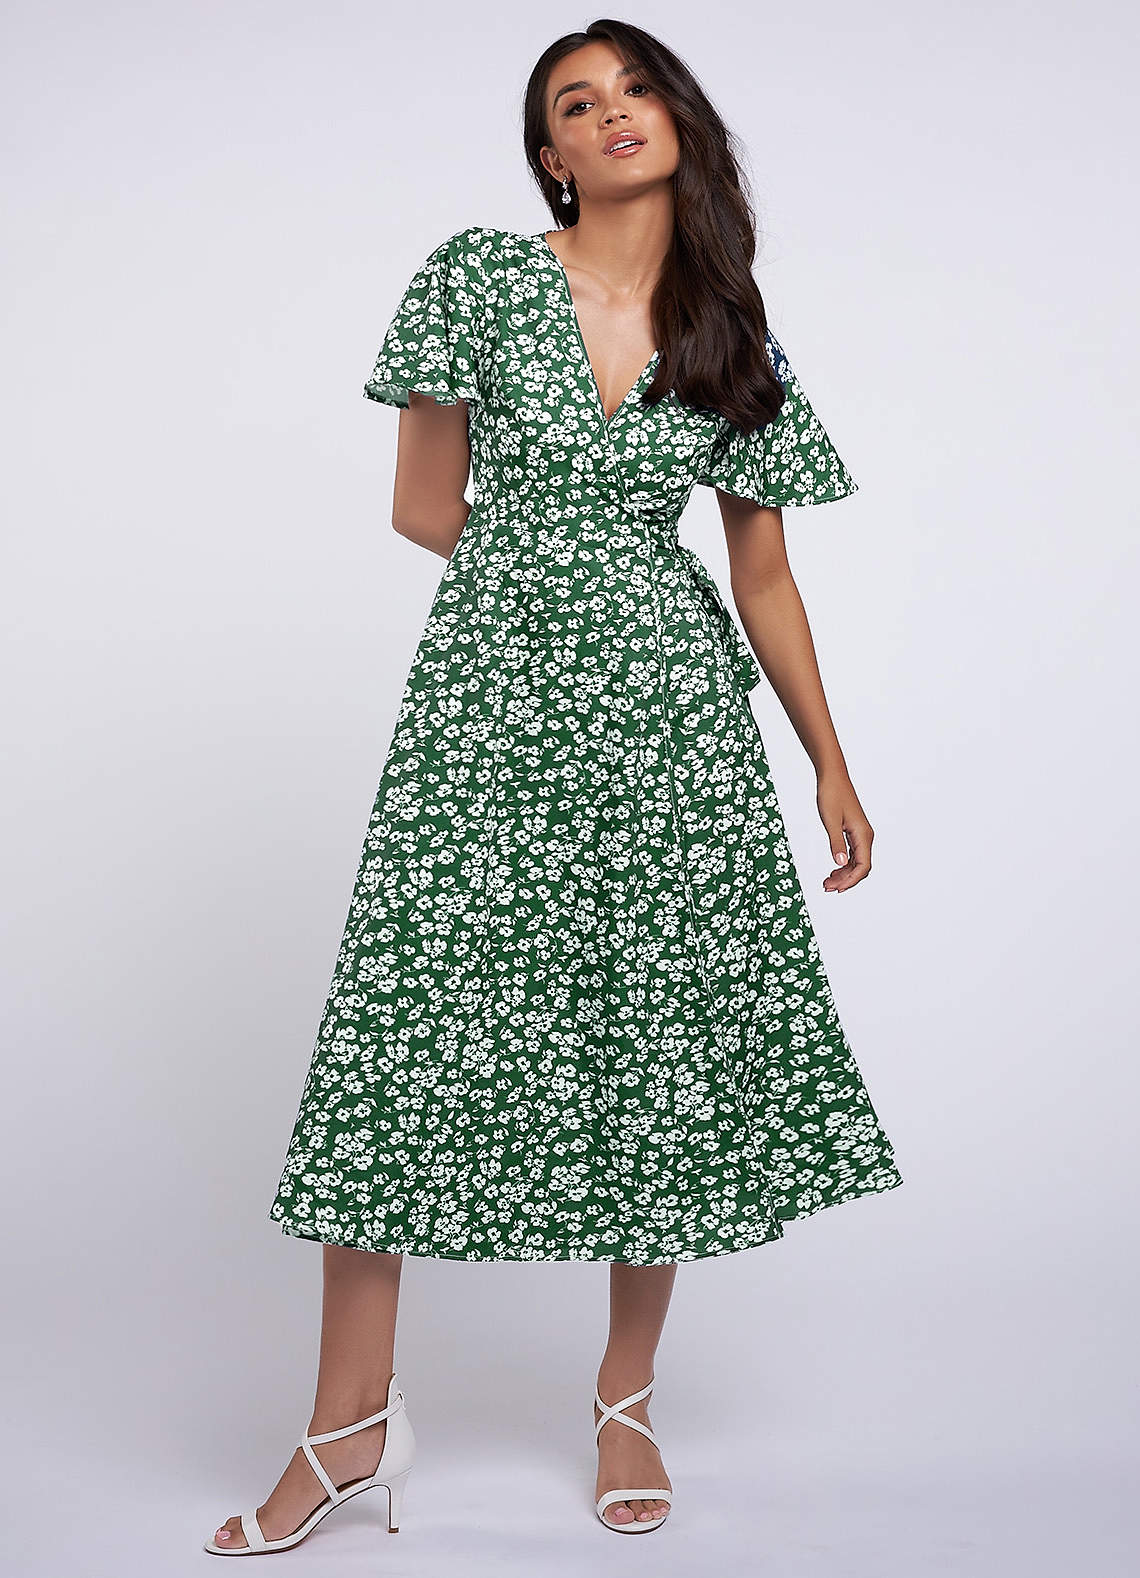 Express Yourself Green Floral Print Wrap Dress image1